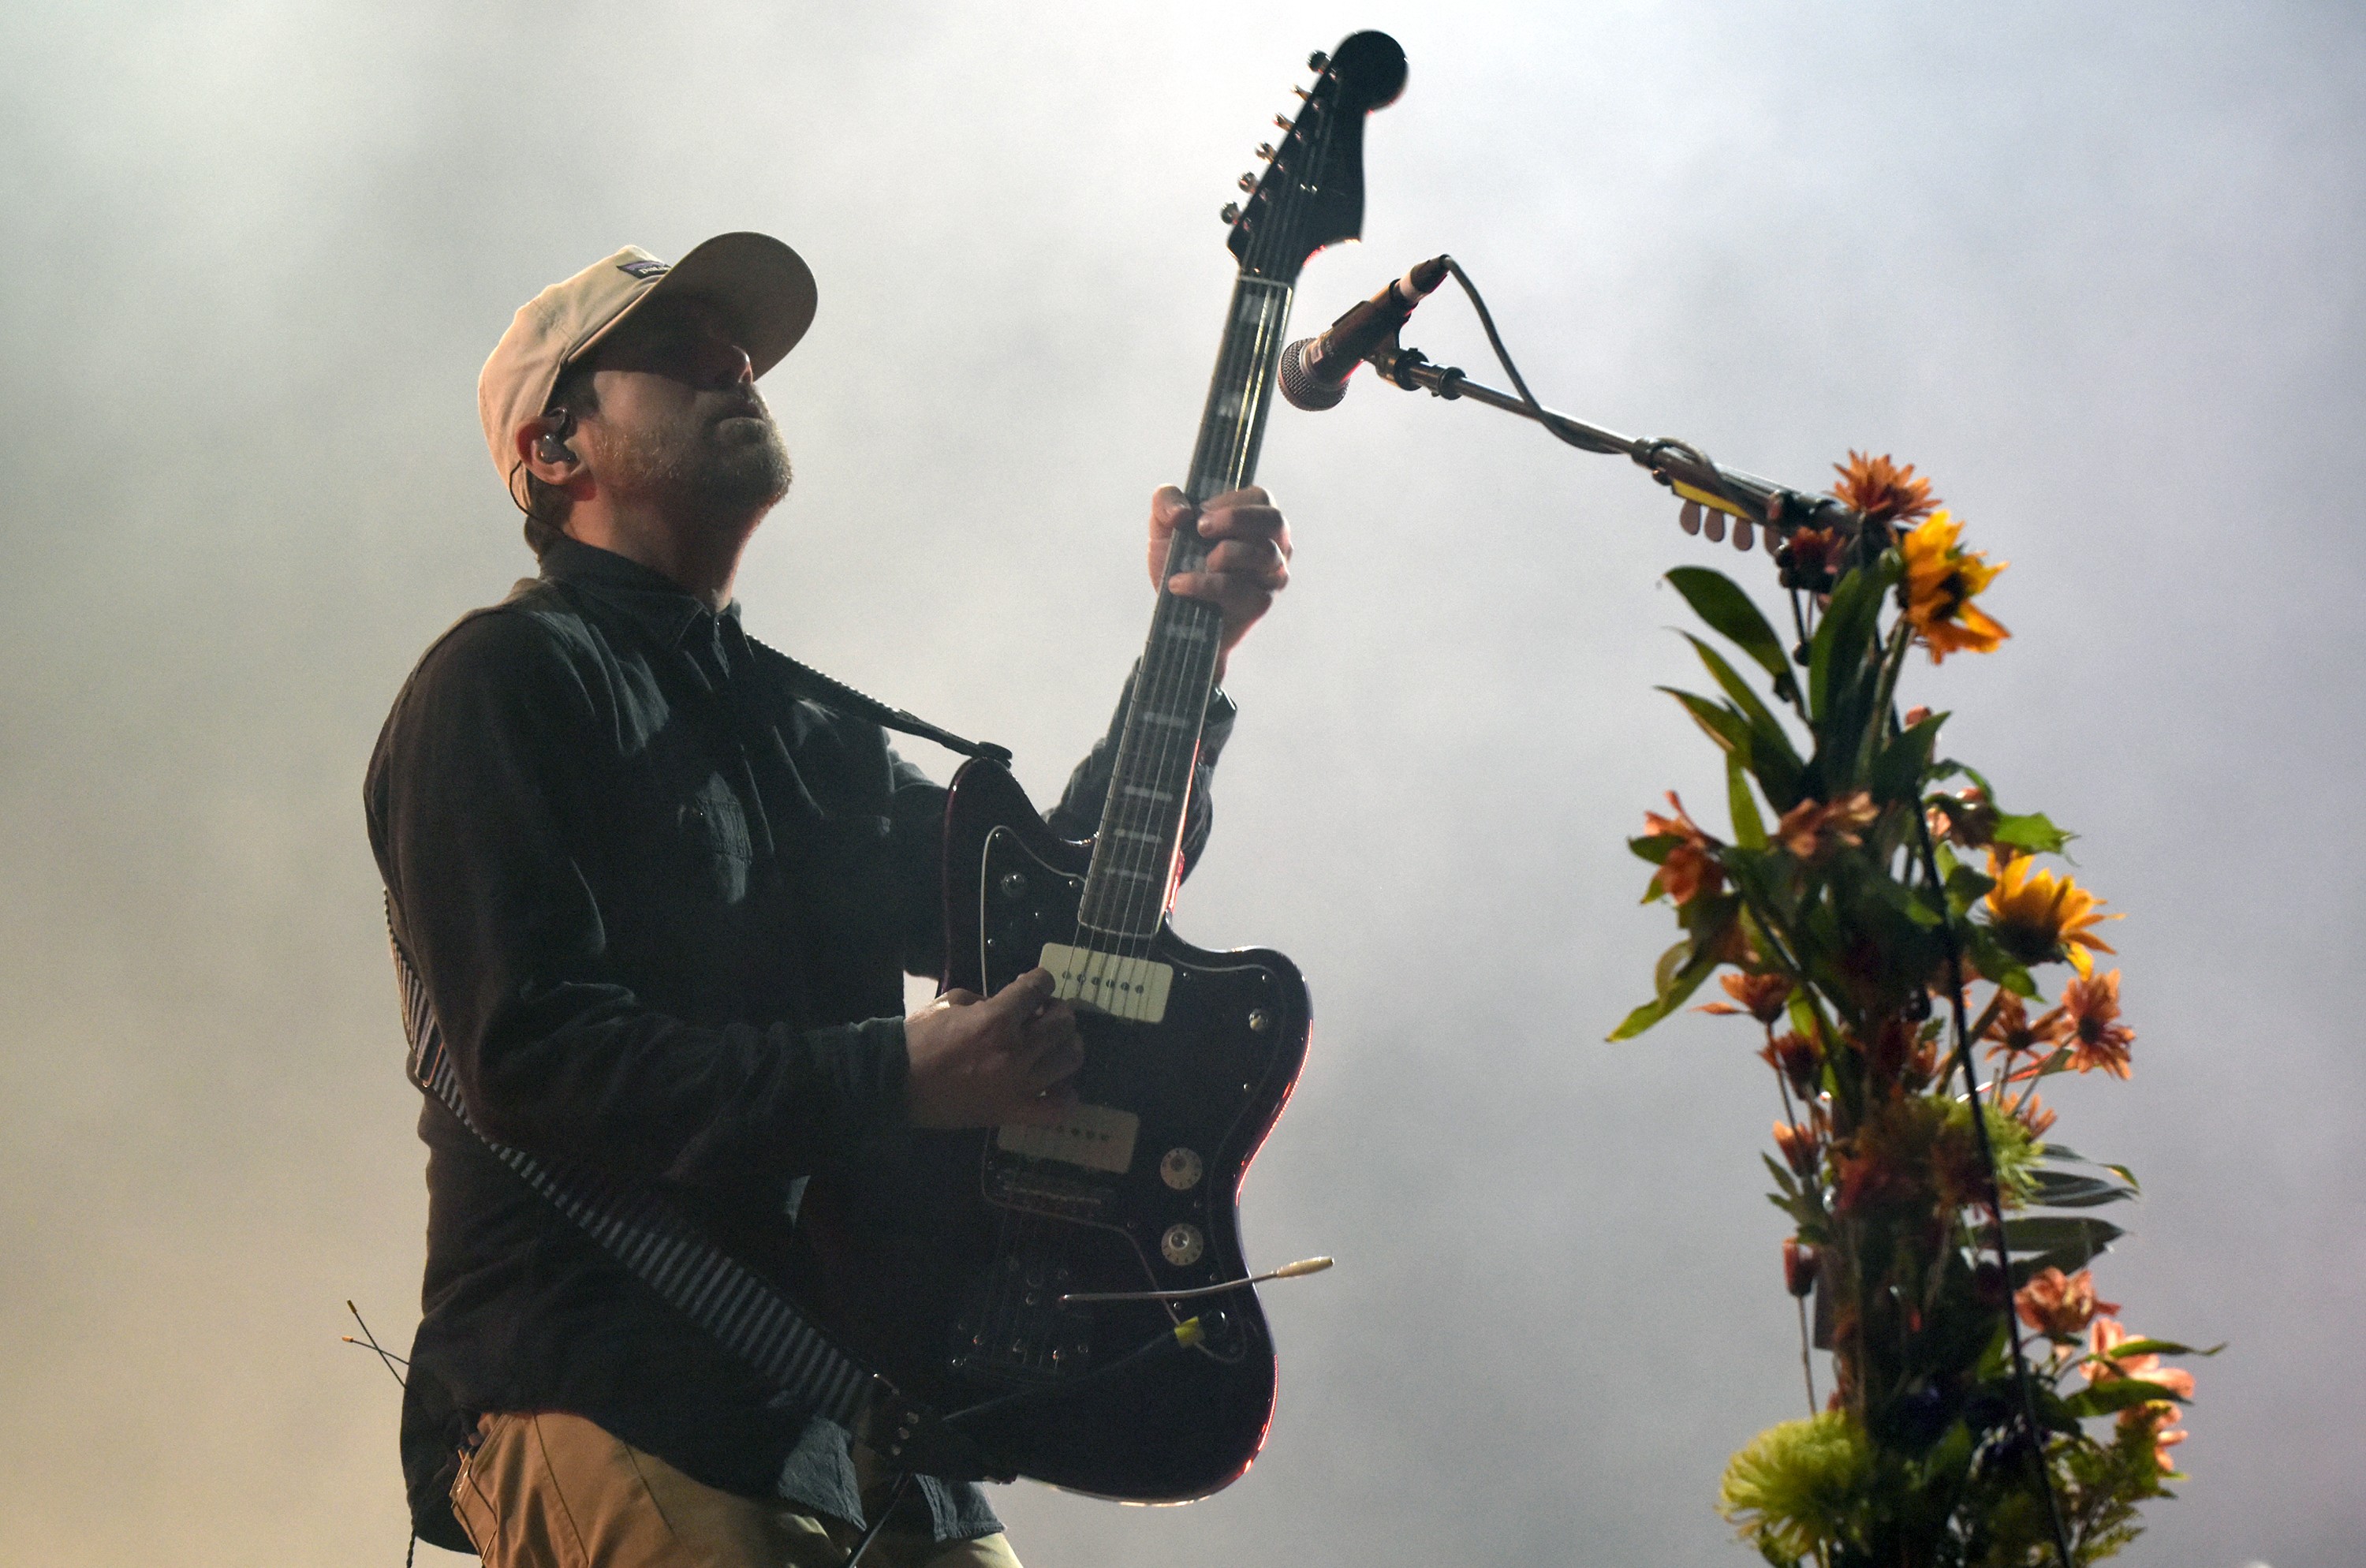 Brand New's Jesse Lacey Responds to Sexual Misconduct Allegations